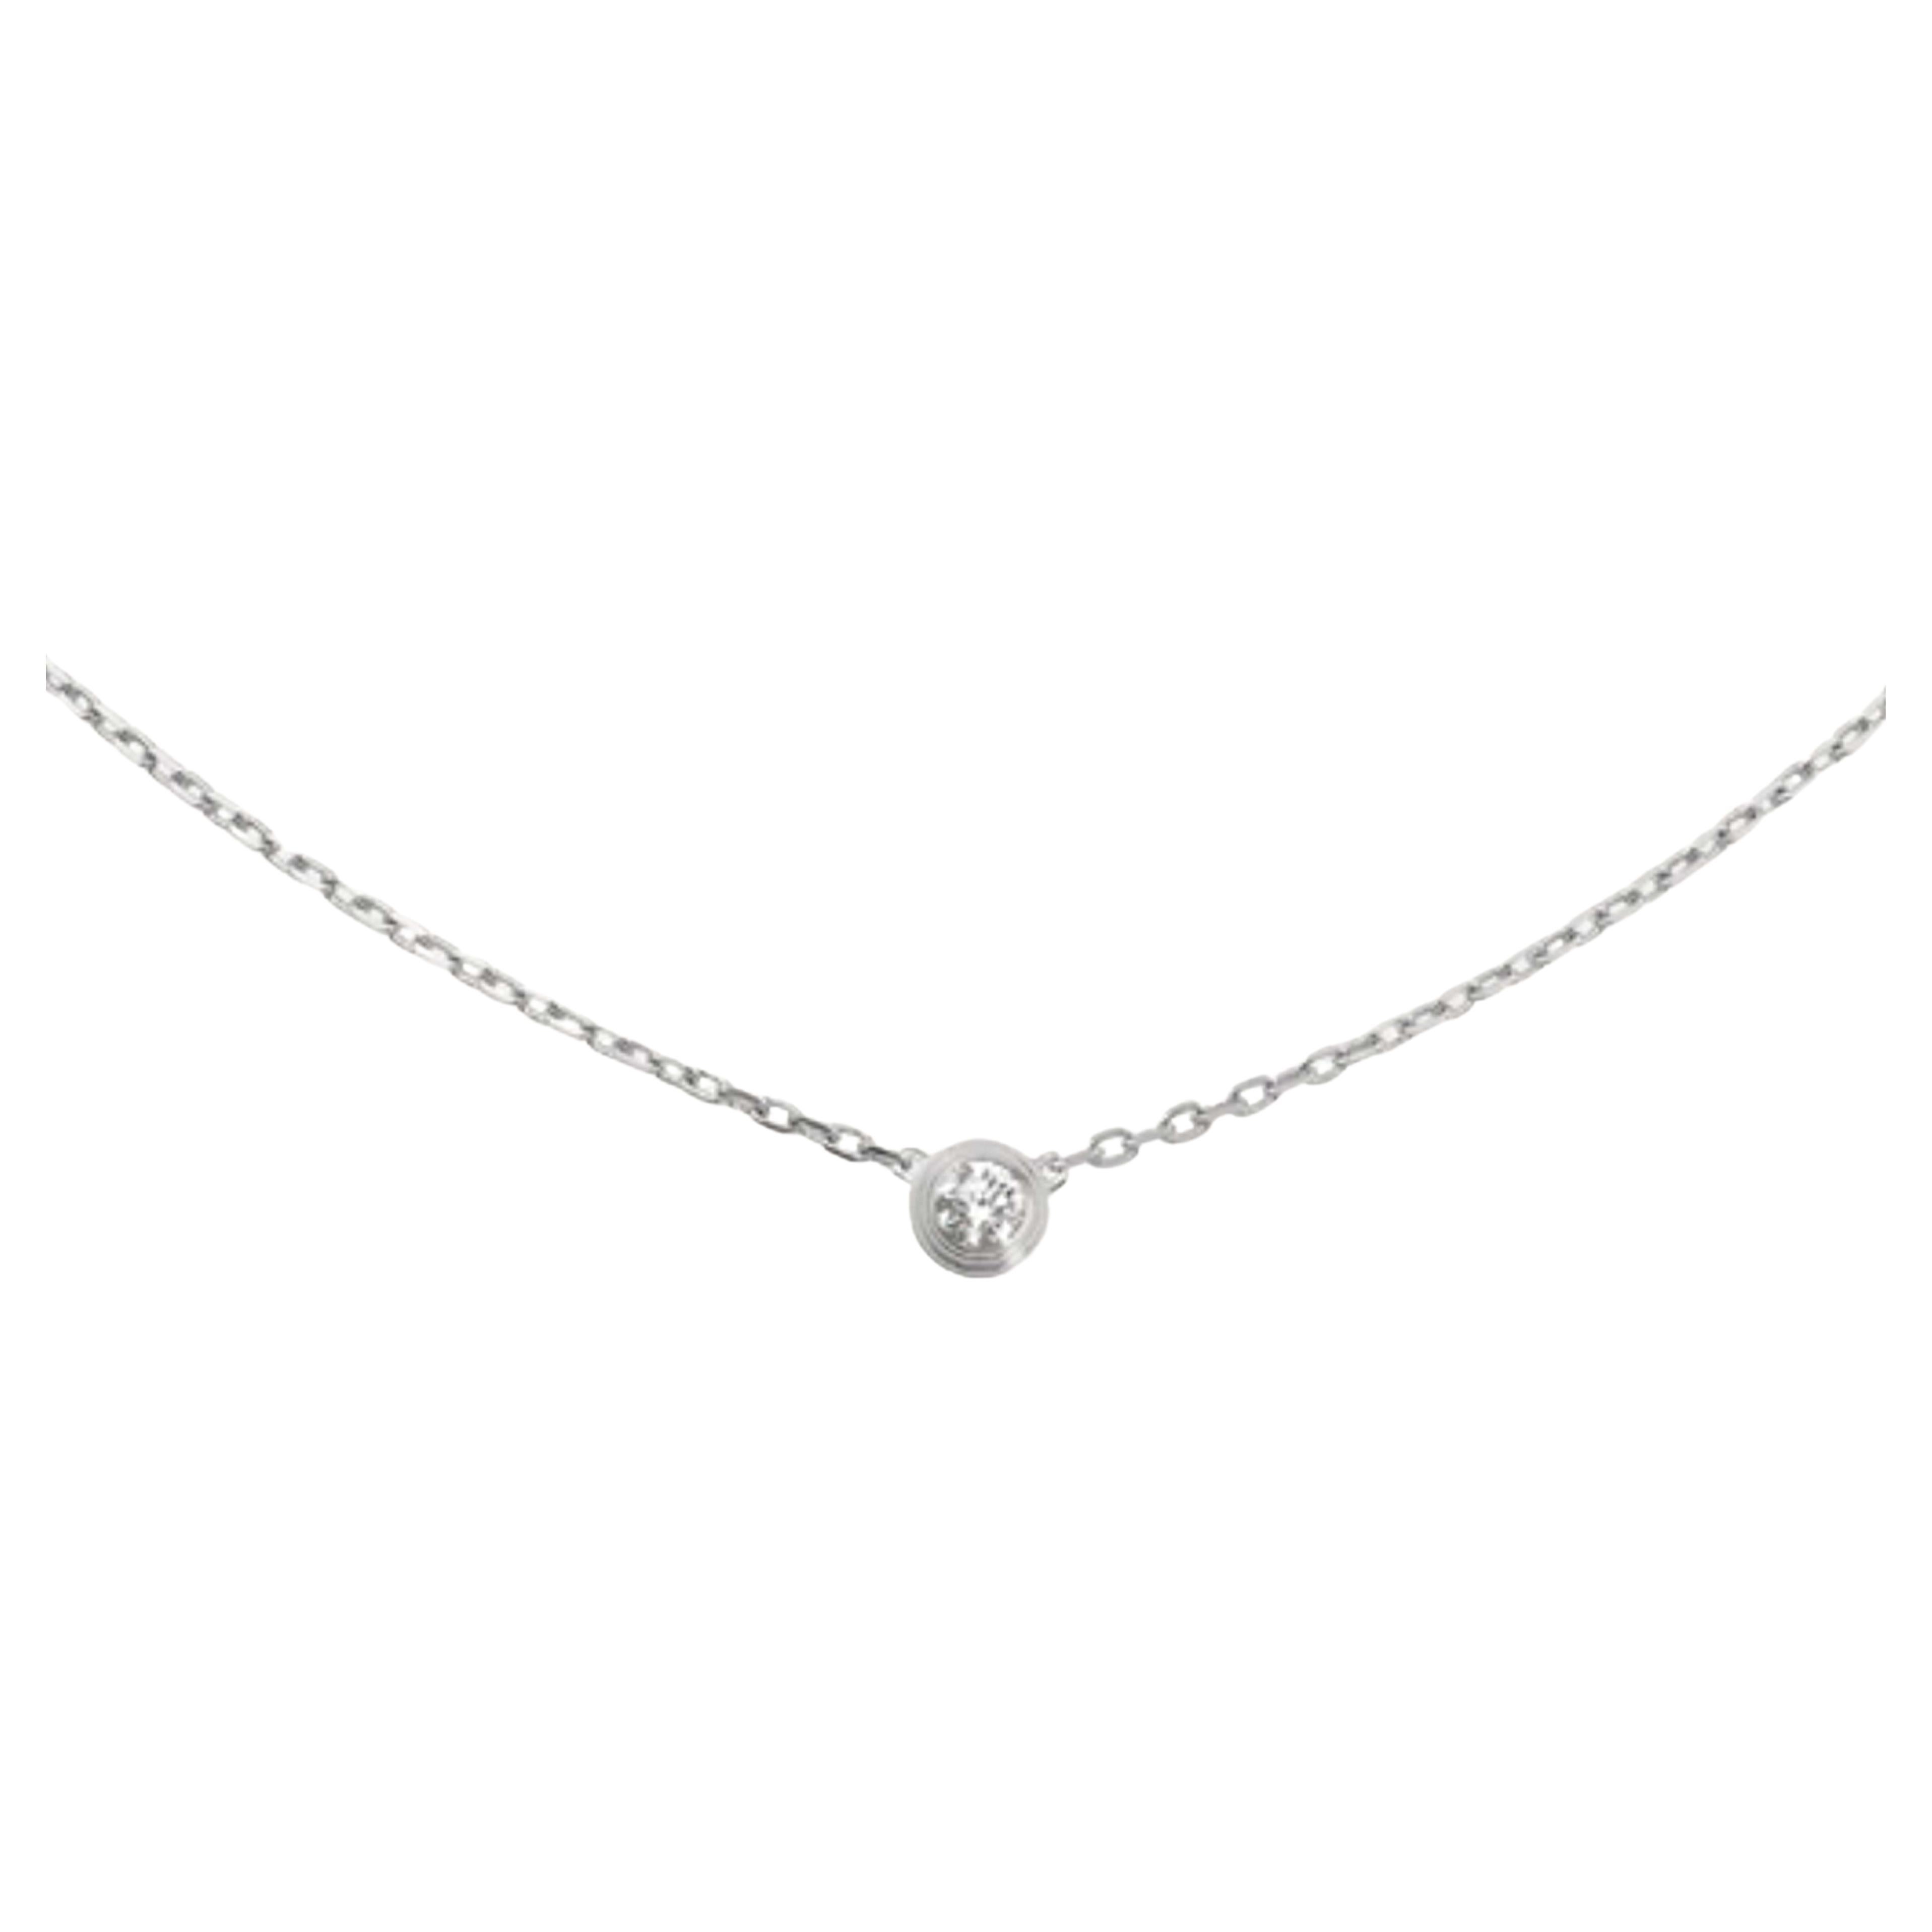 Cartier D'amour Diamond Necklace in 18k White Gold